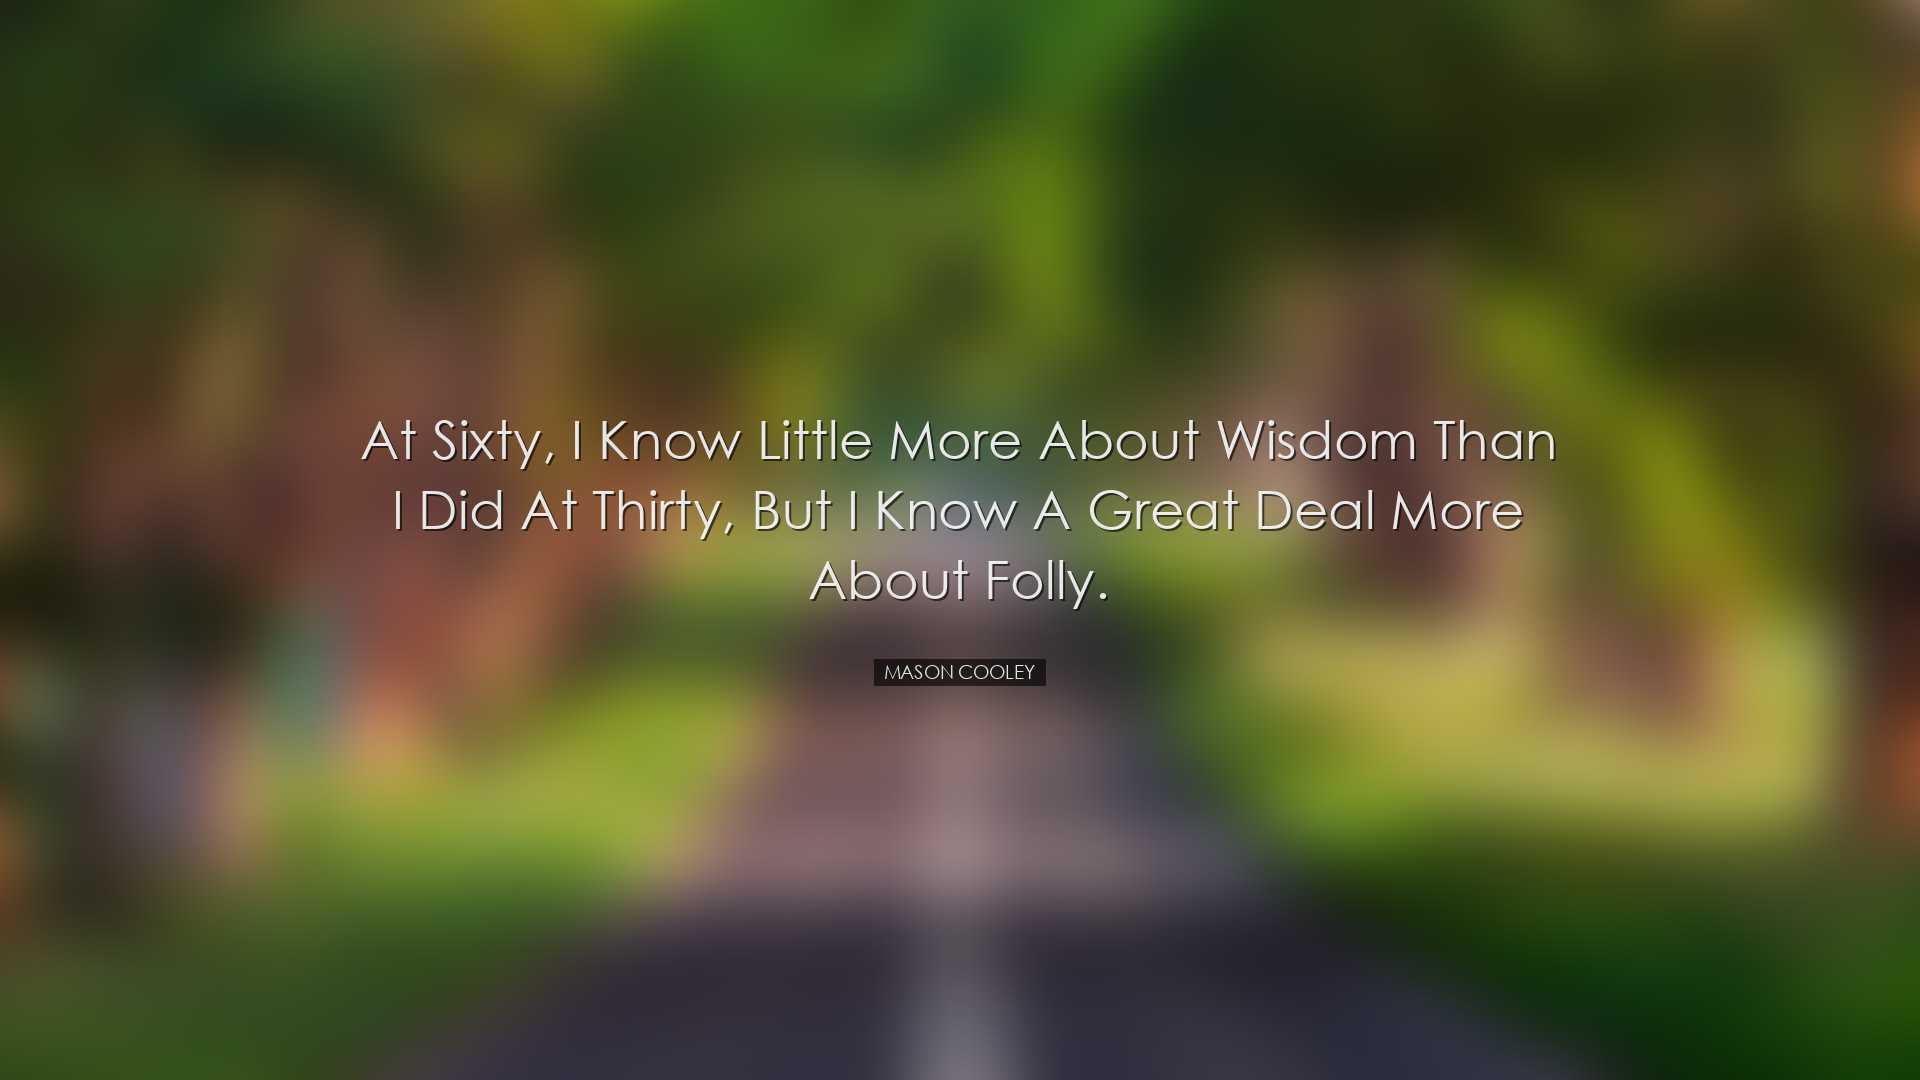 At sixty, I know little more about wisdom than I did at thirty, bu